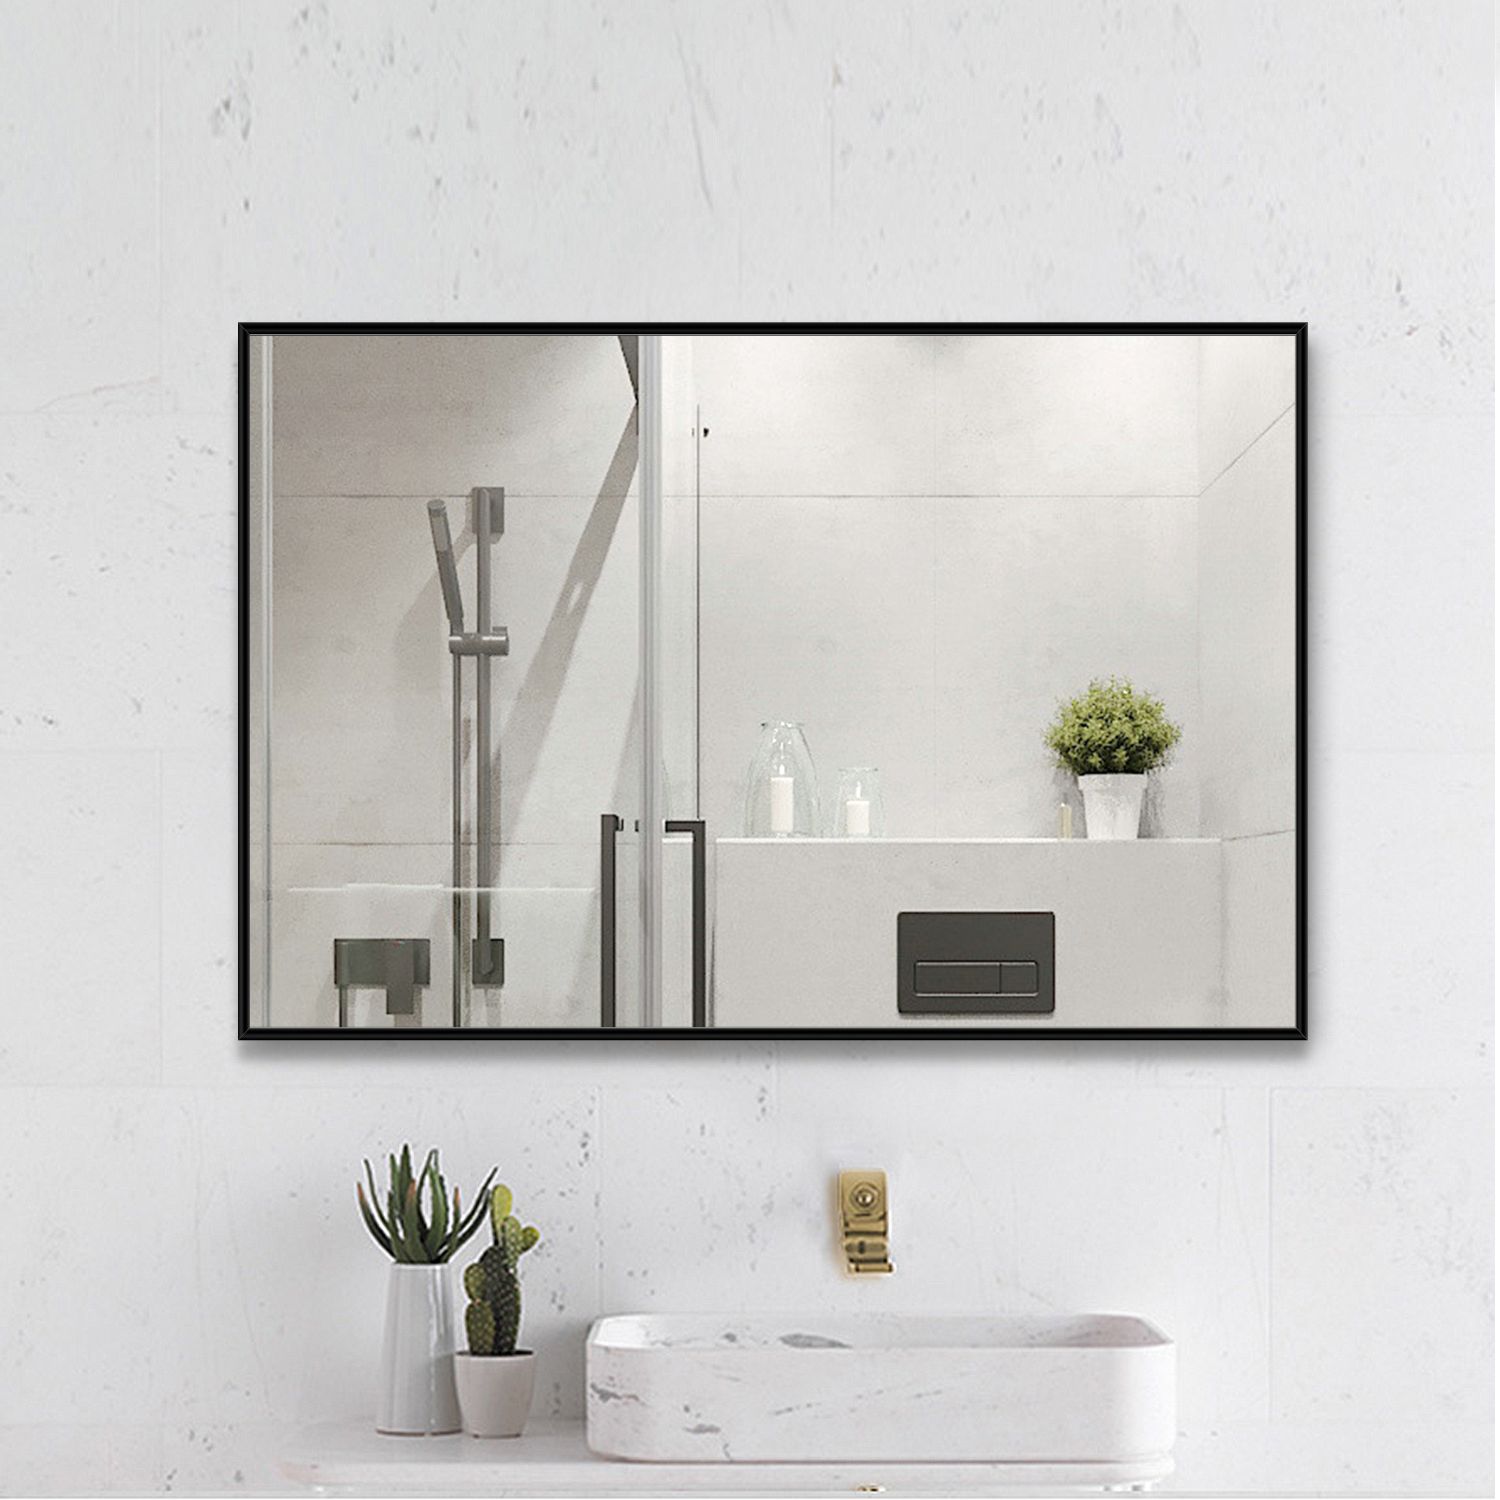 Well Known Neutype 38" X 26" Black Bathroom Mirror Modern Aluminum Alloy Frame With Mirror Framed Bathroom Wall Mirrors (View 15 of 15)